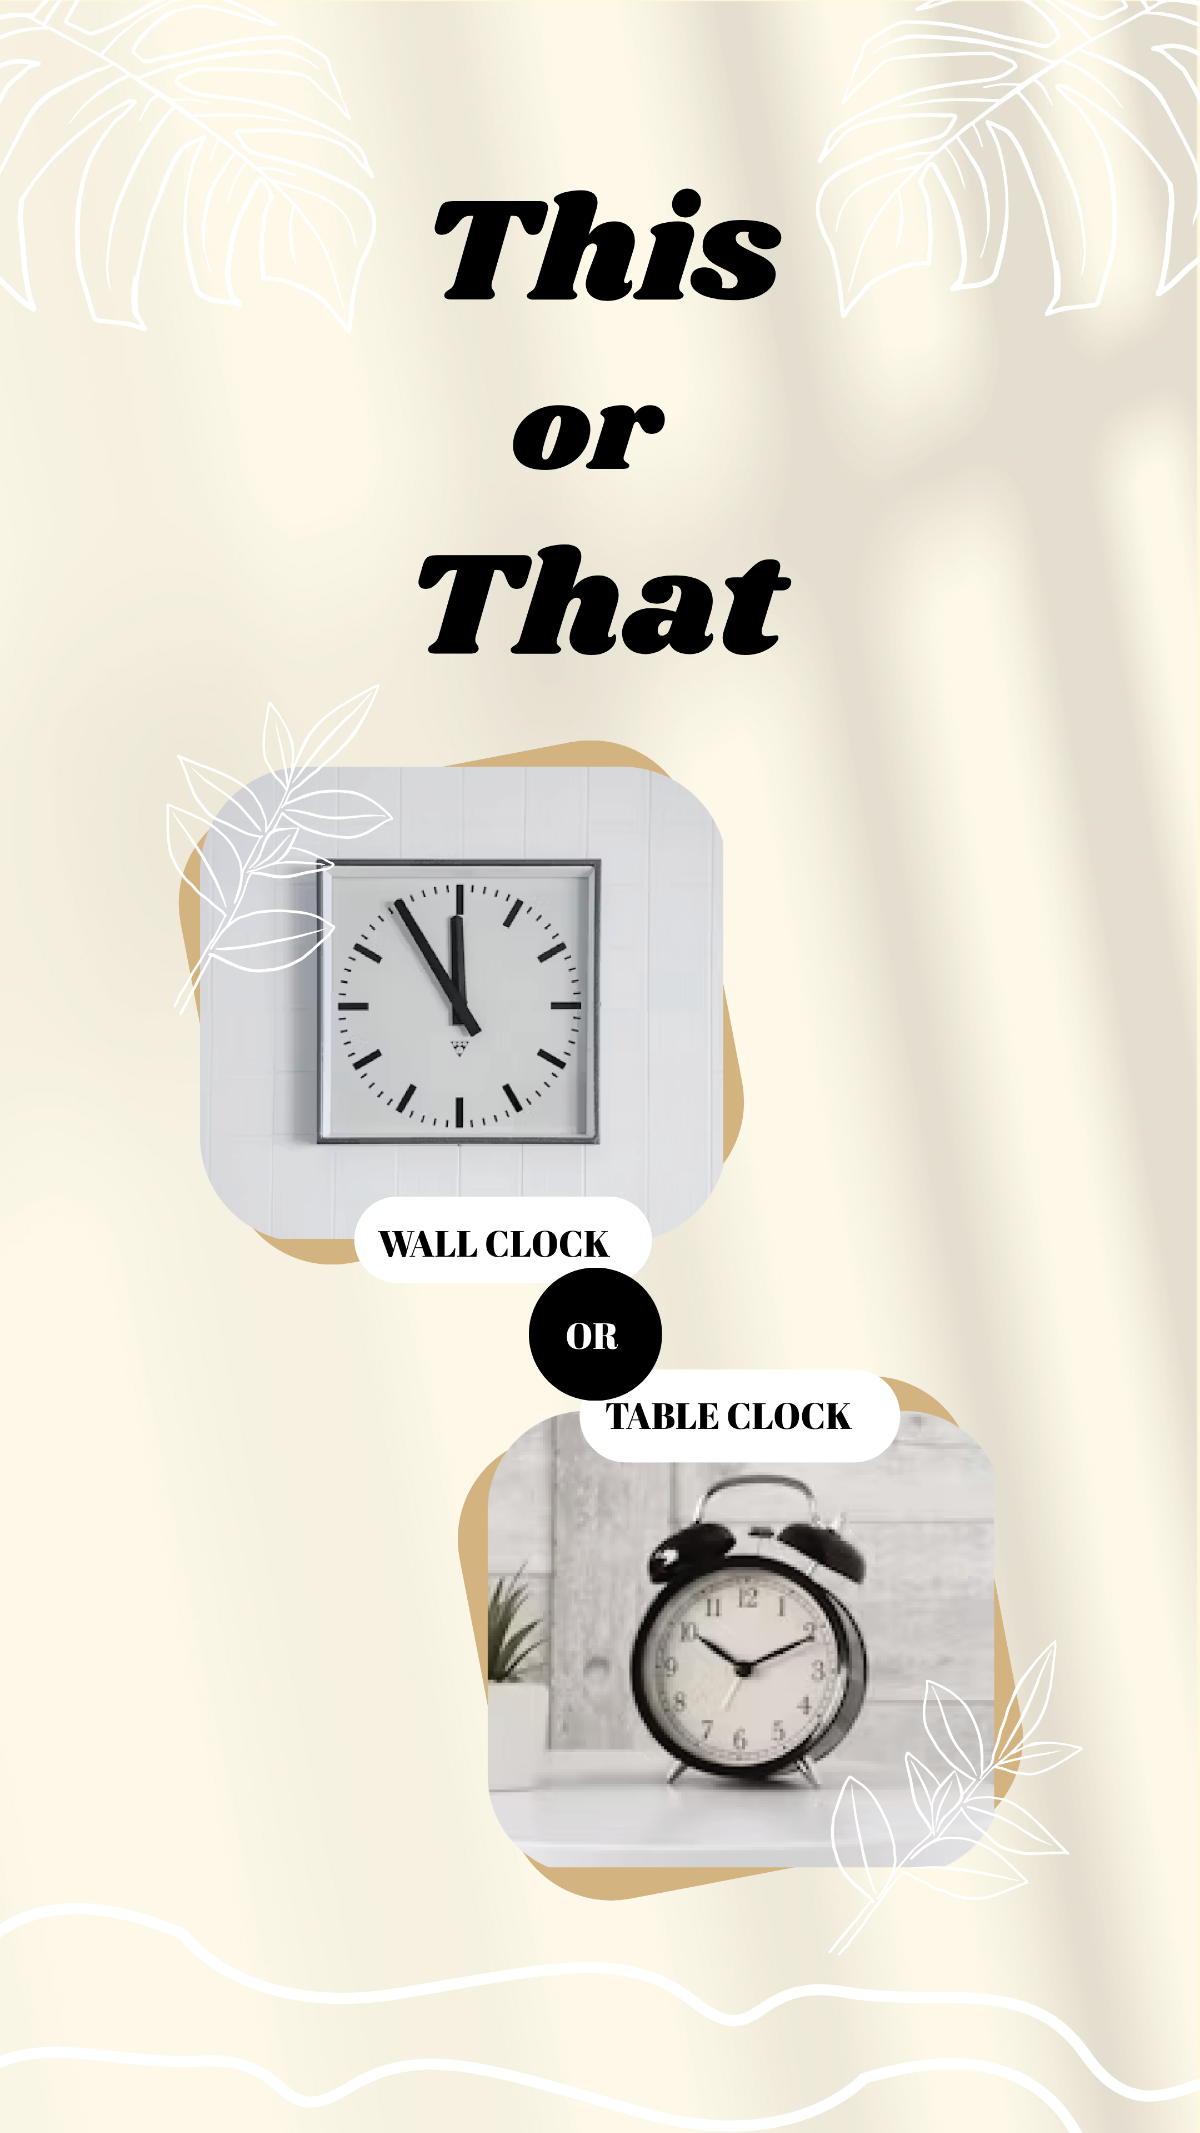 Free Wall Clock or Table Clock This or That Template